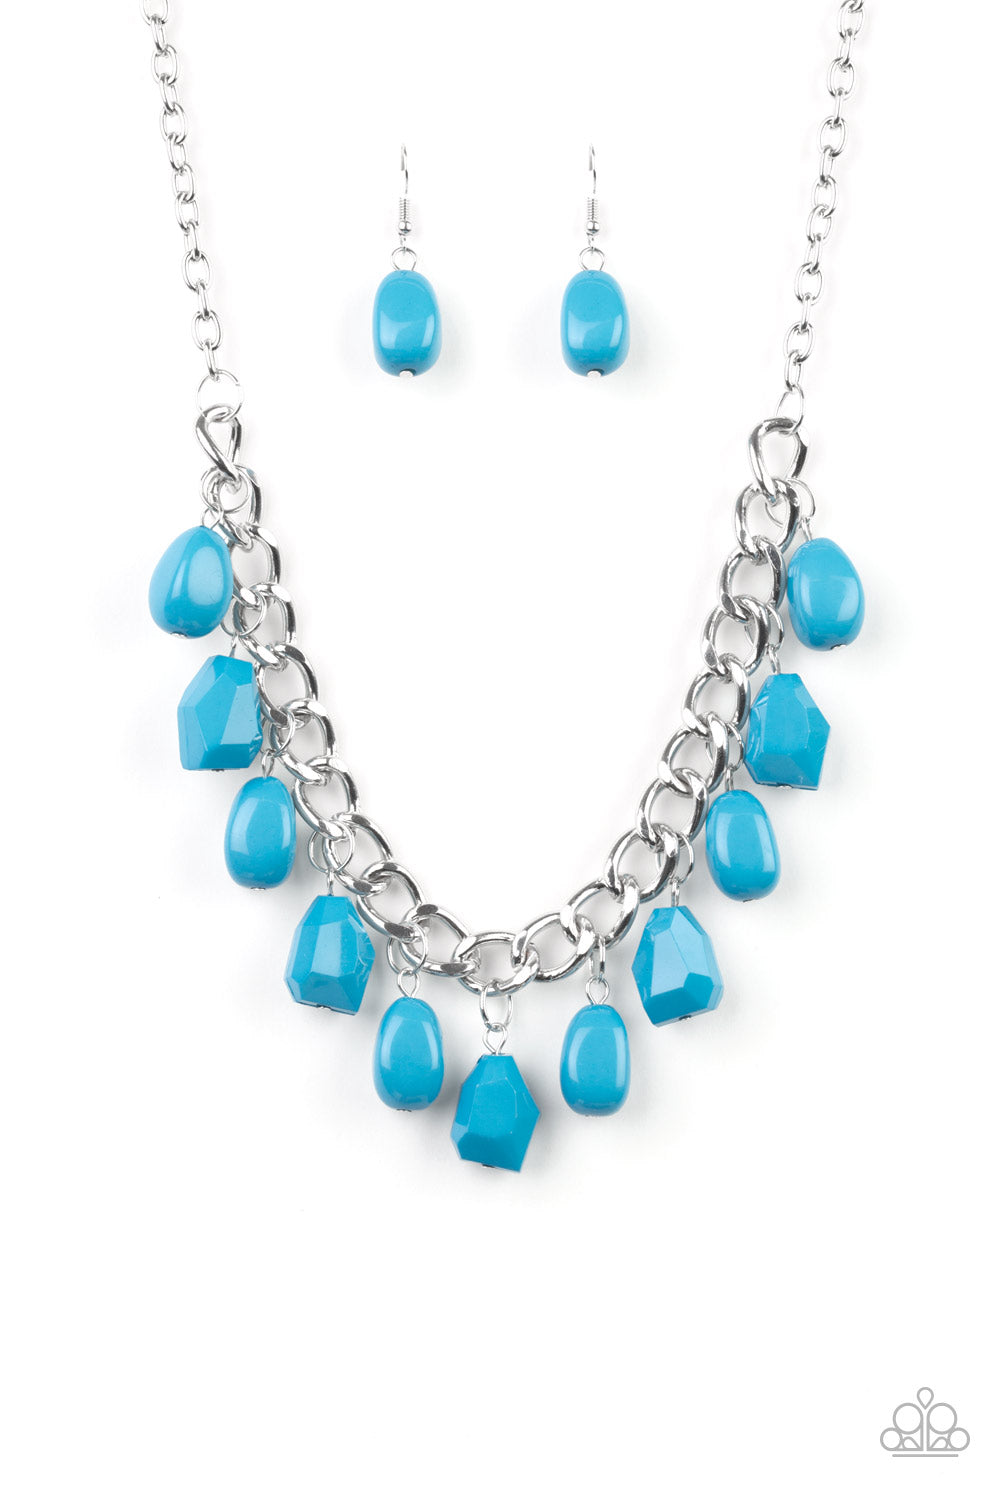 Take The COLOR Wheel! Necklace - Blue